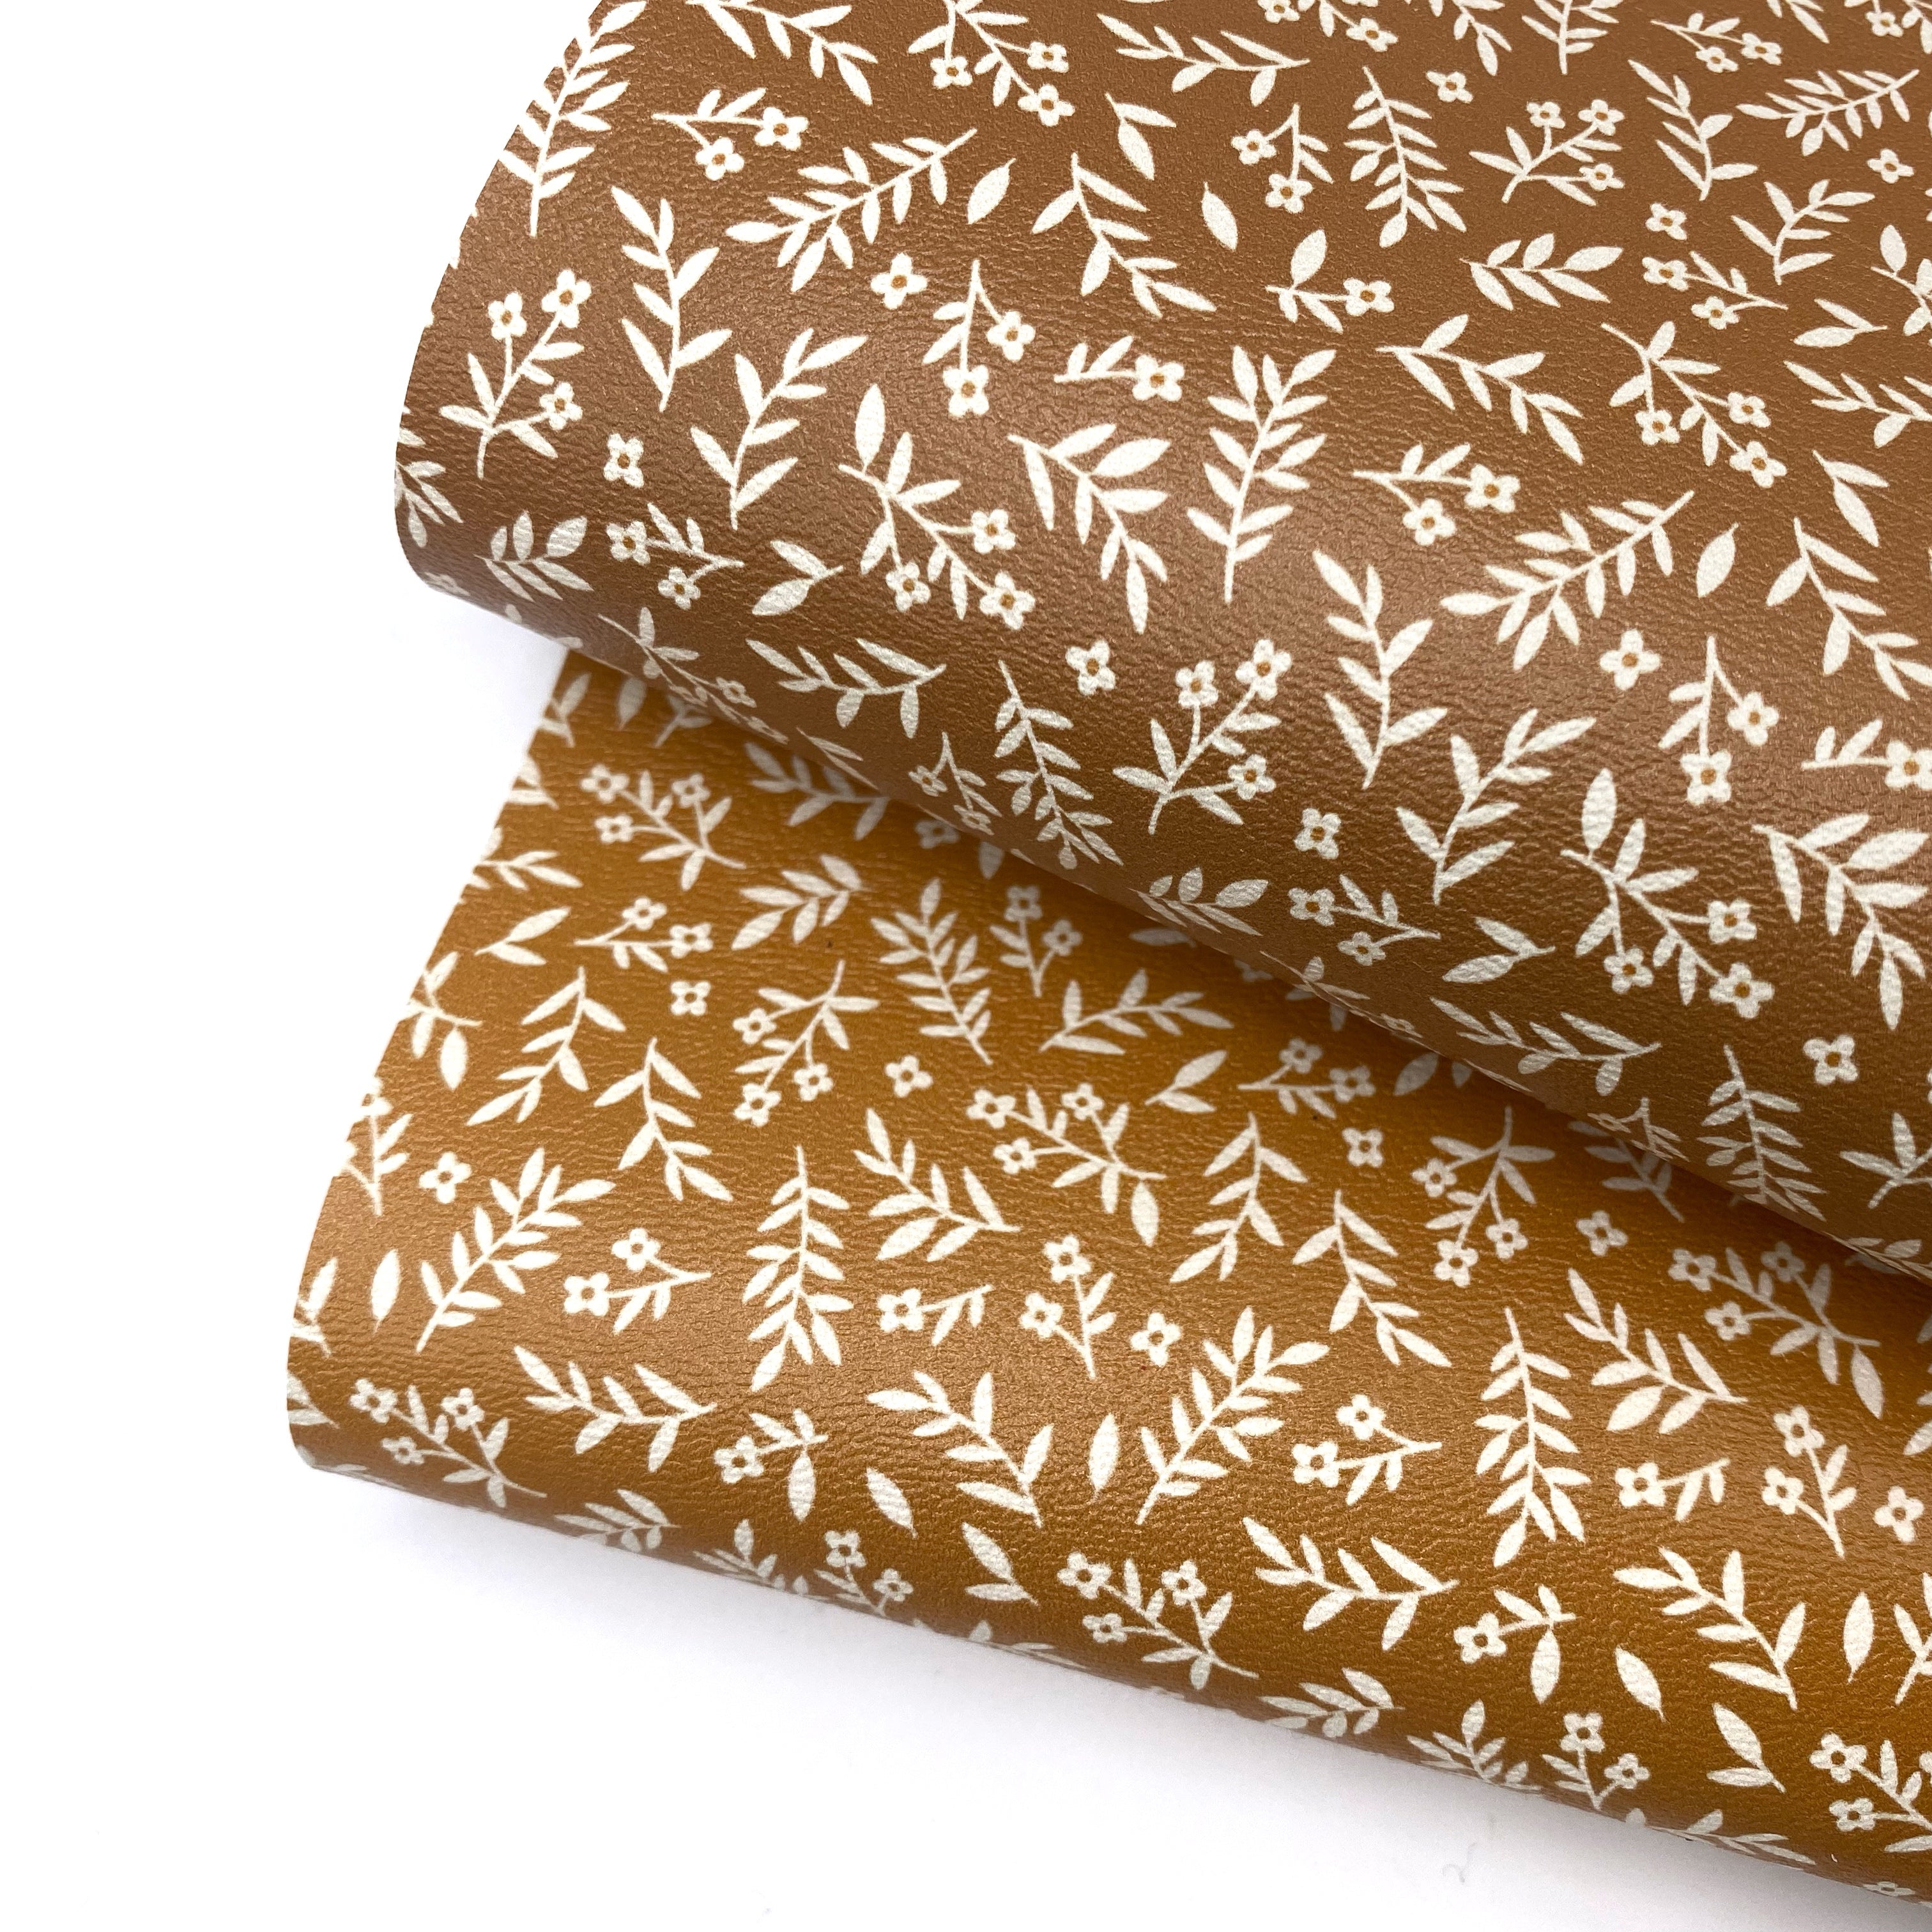 Brown Falling Fall Florals Premium Faux Leather Fabric Sheets